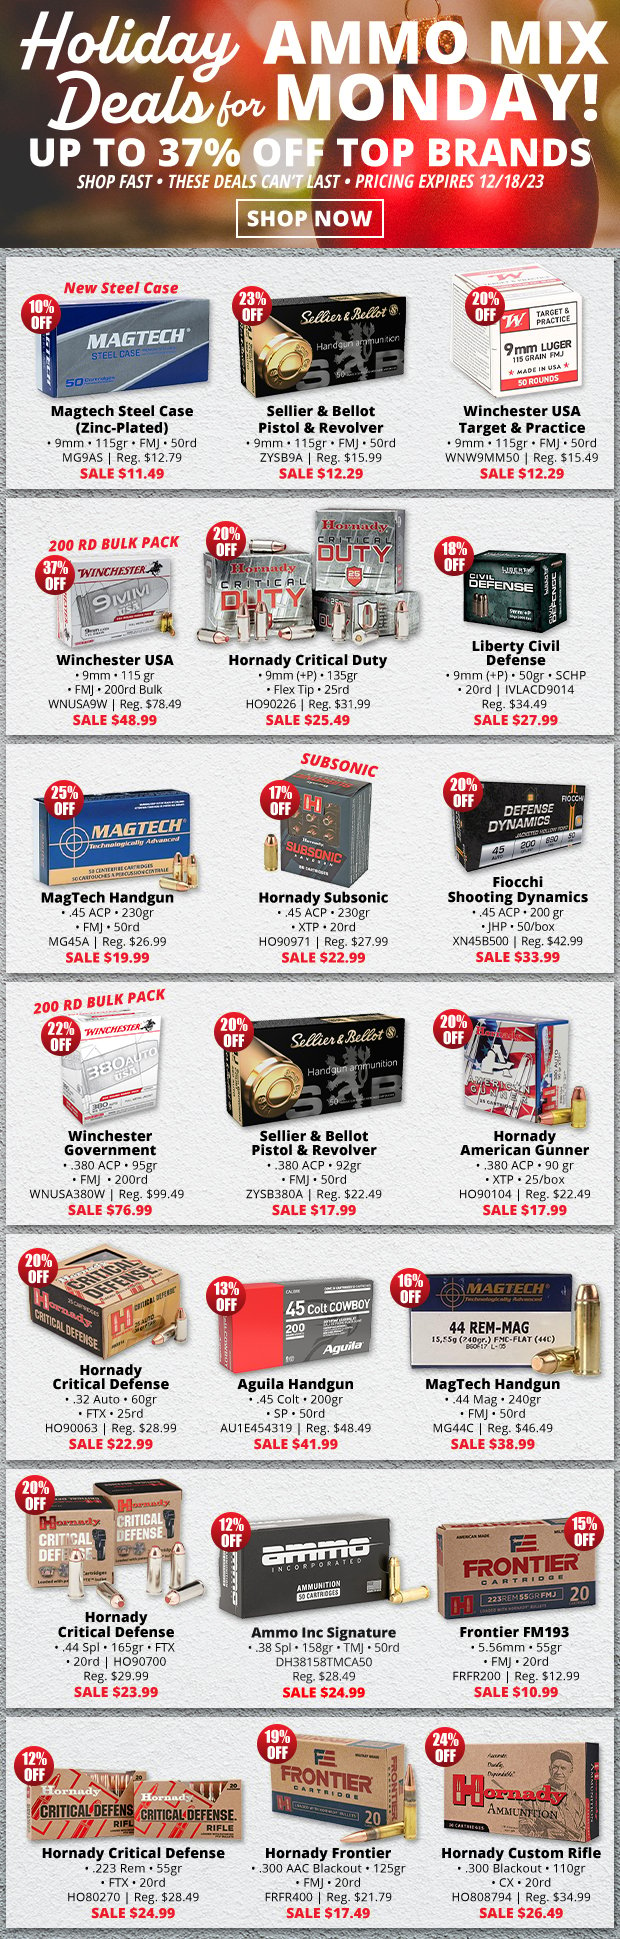 Holiday Deals for Ammo Mix Monday Up to 37% Off!